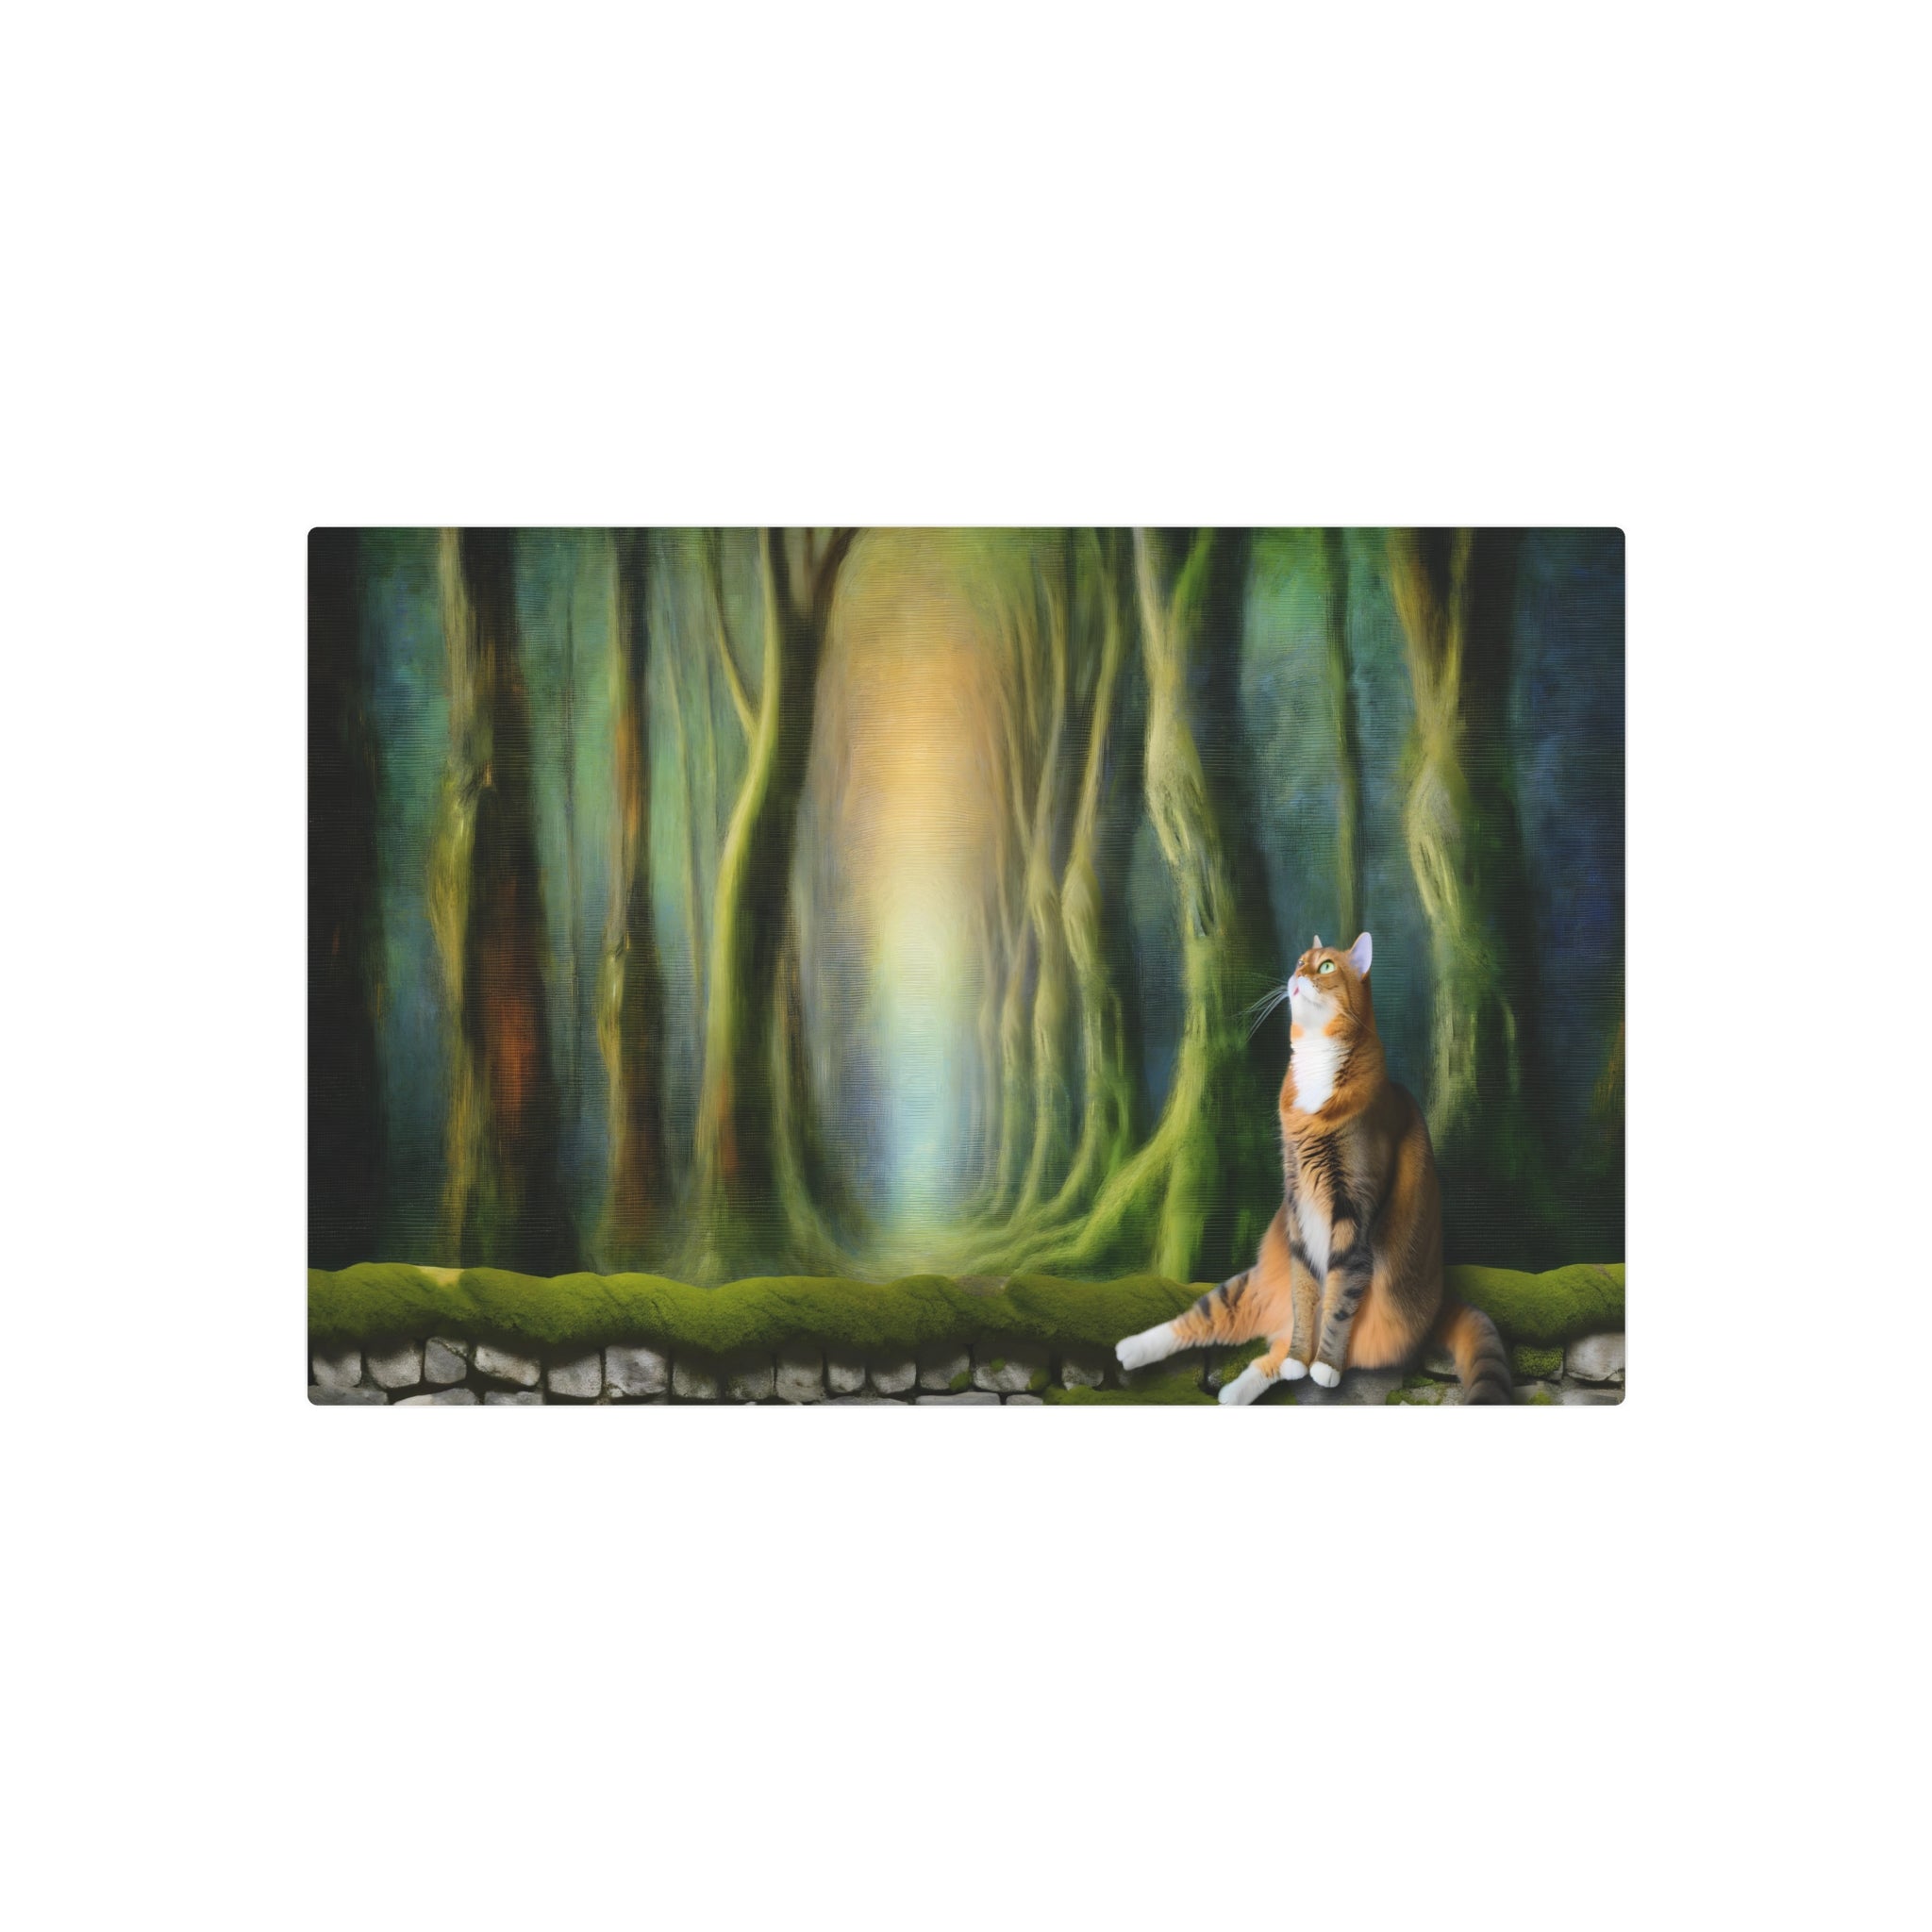 Metal Poster Art | "Enchanting Romanticism Art Painting - Majestic Cat on Ancient Stone Wall Amid Ethereal Forest Glow - Dramatic Emotion in Western Art Styles - Metal Poster Art 30″ x 20″ (Horizontal) 0.12''